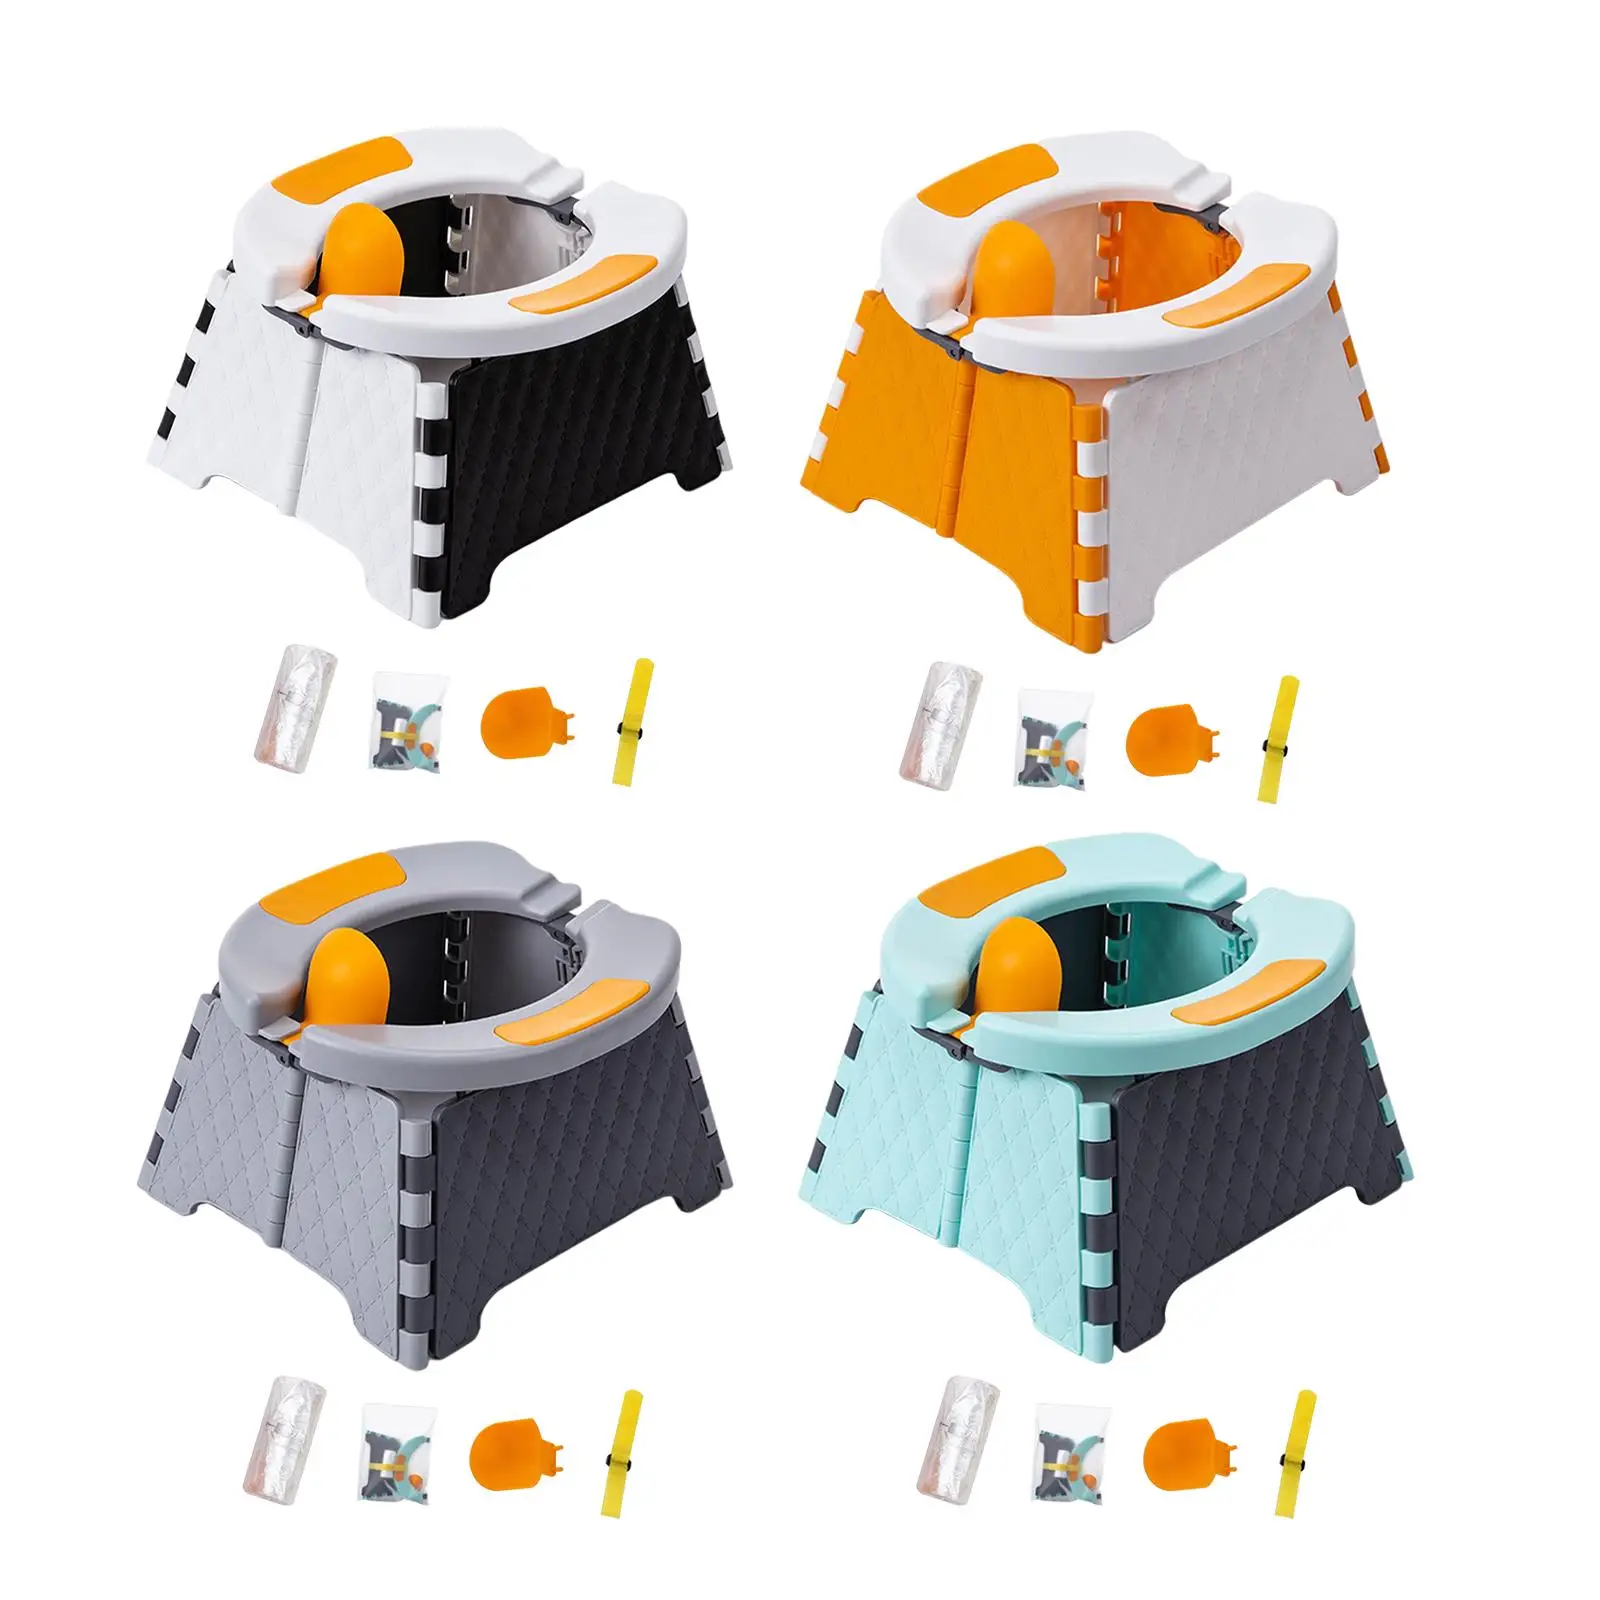 Portable Foldable Training Potty Seat for baby , for Camping, , Car Traveling etc